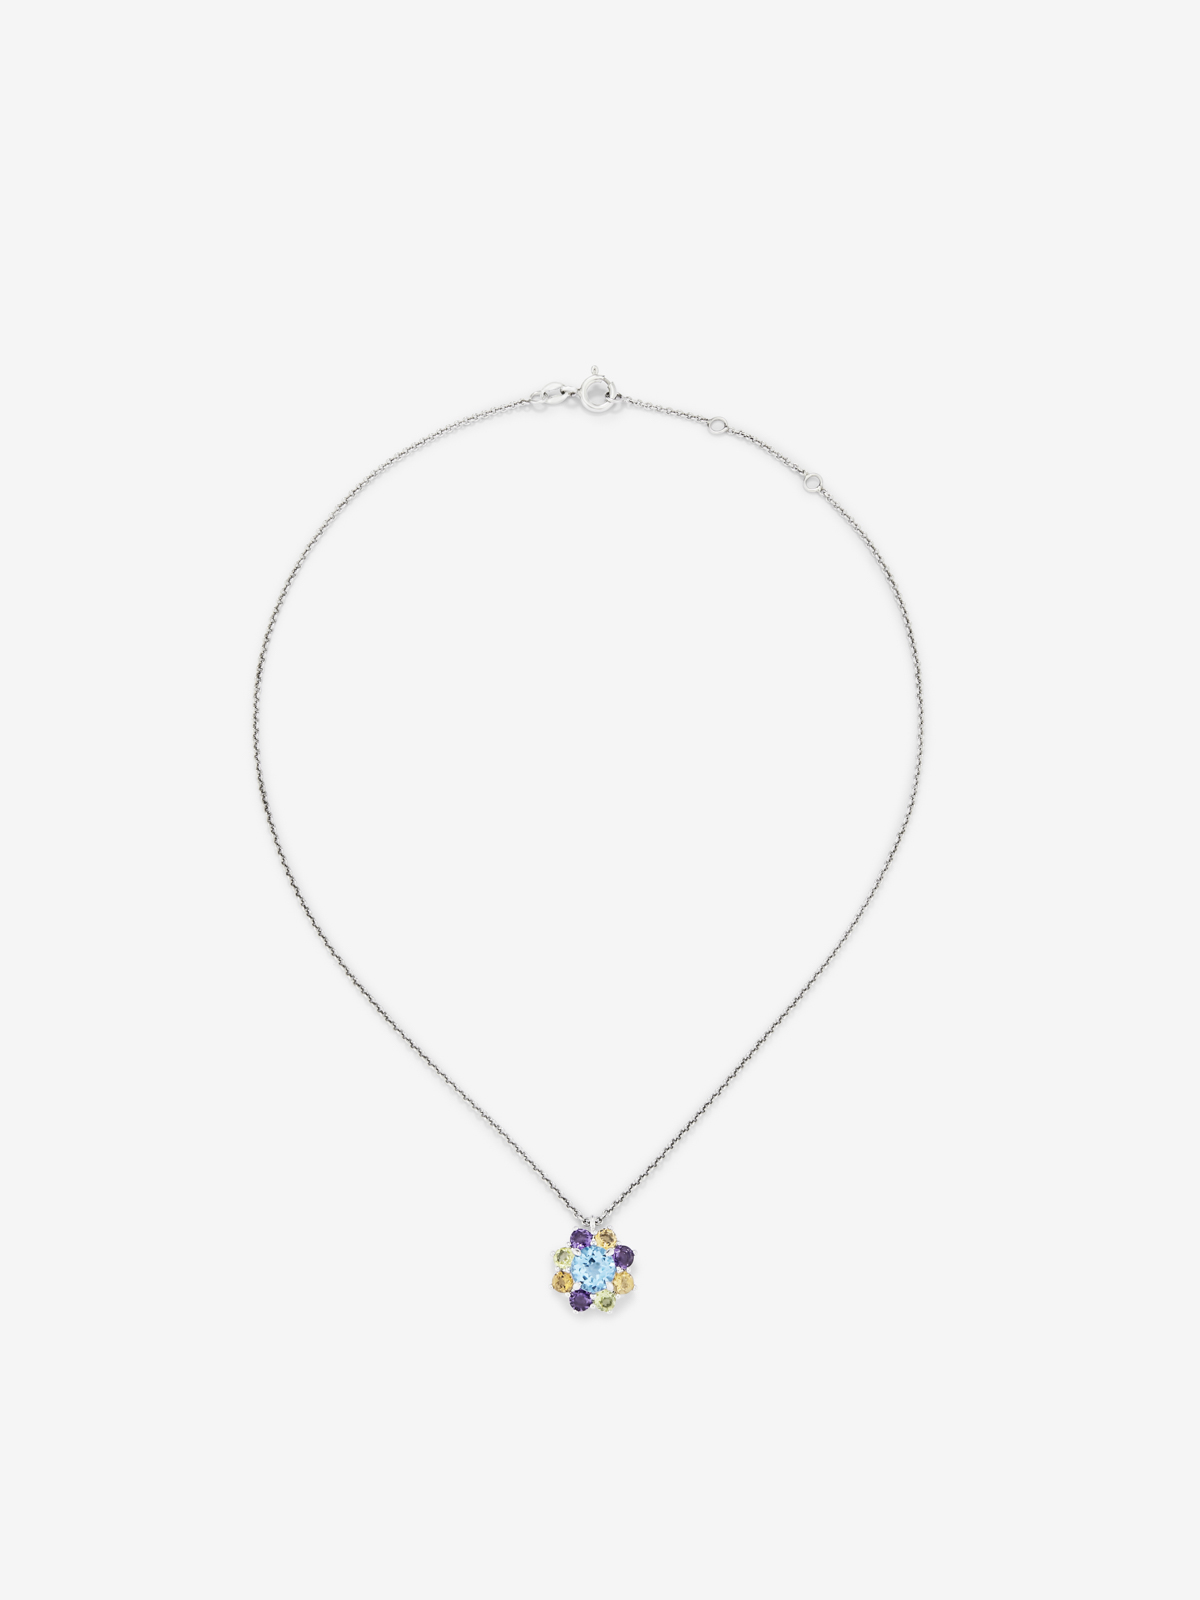 925 silver rosette pendant with multicolored gems